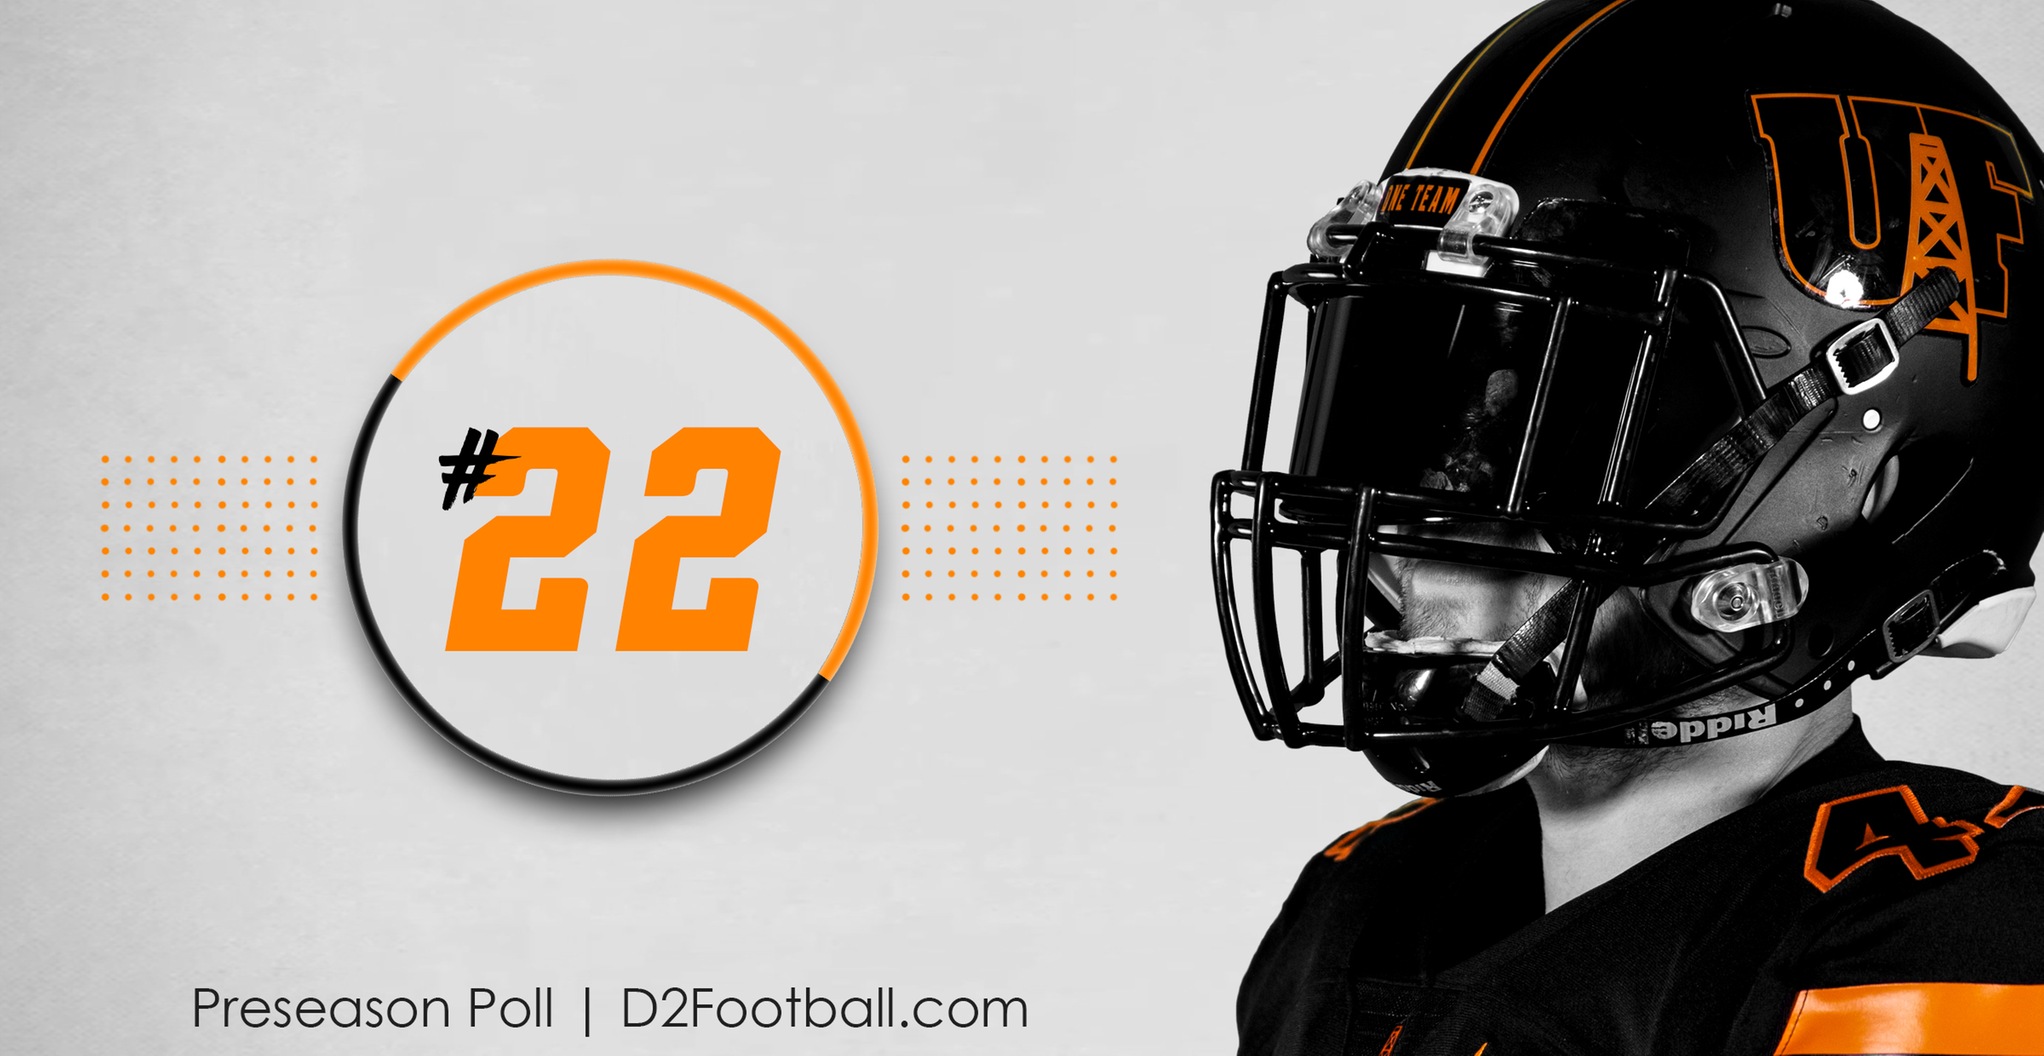 Oilers Ranked 22nd in D2Football.com Poll